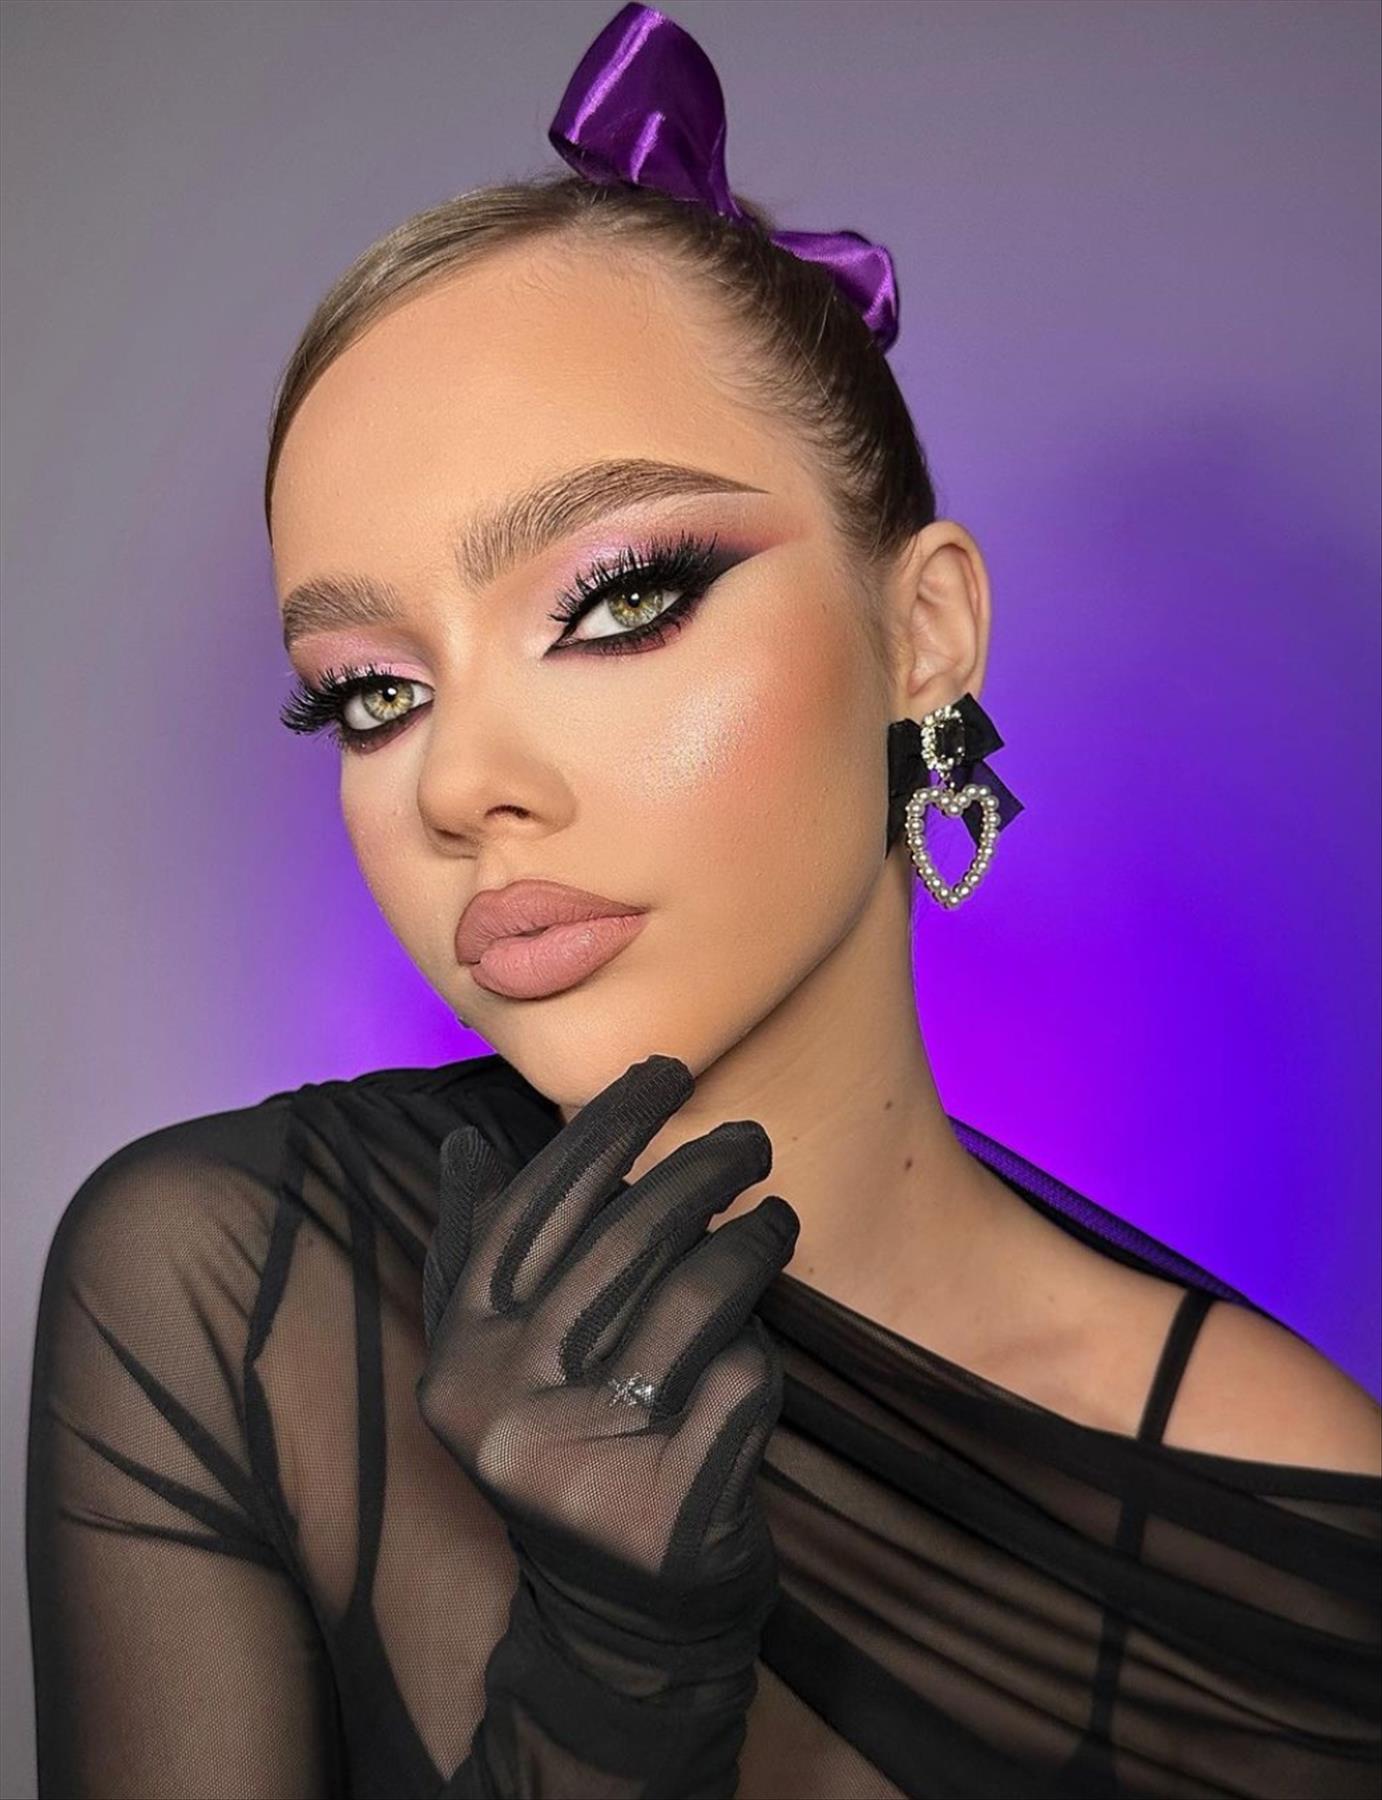 How To Achieve a Stunning Prom Makeup Look with Nude Lips? 